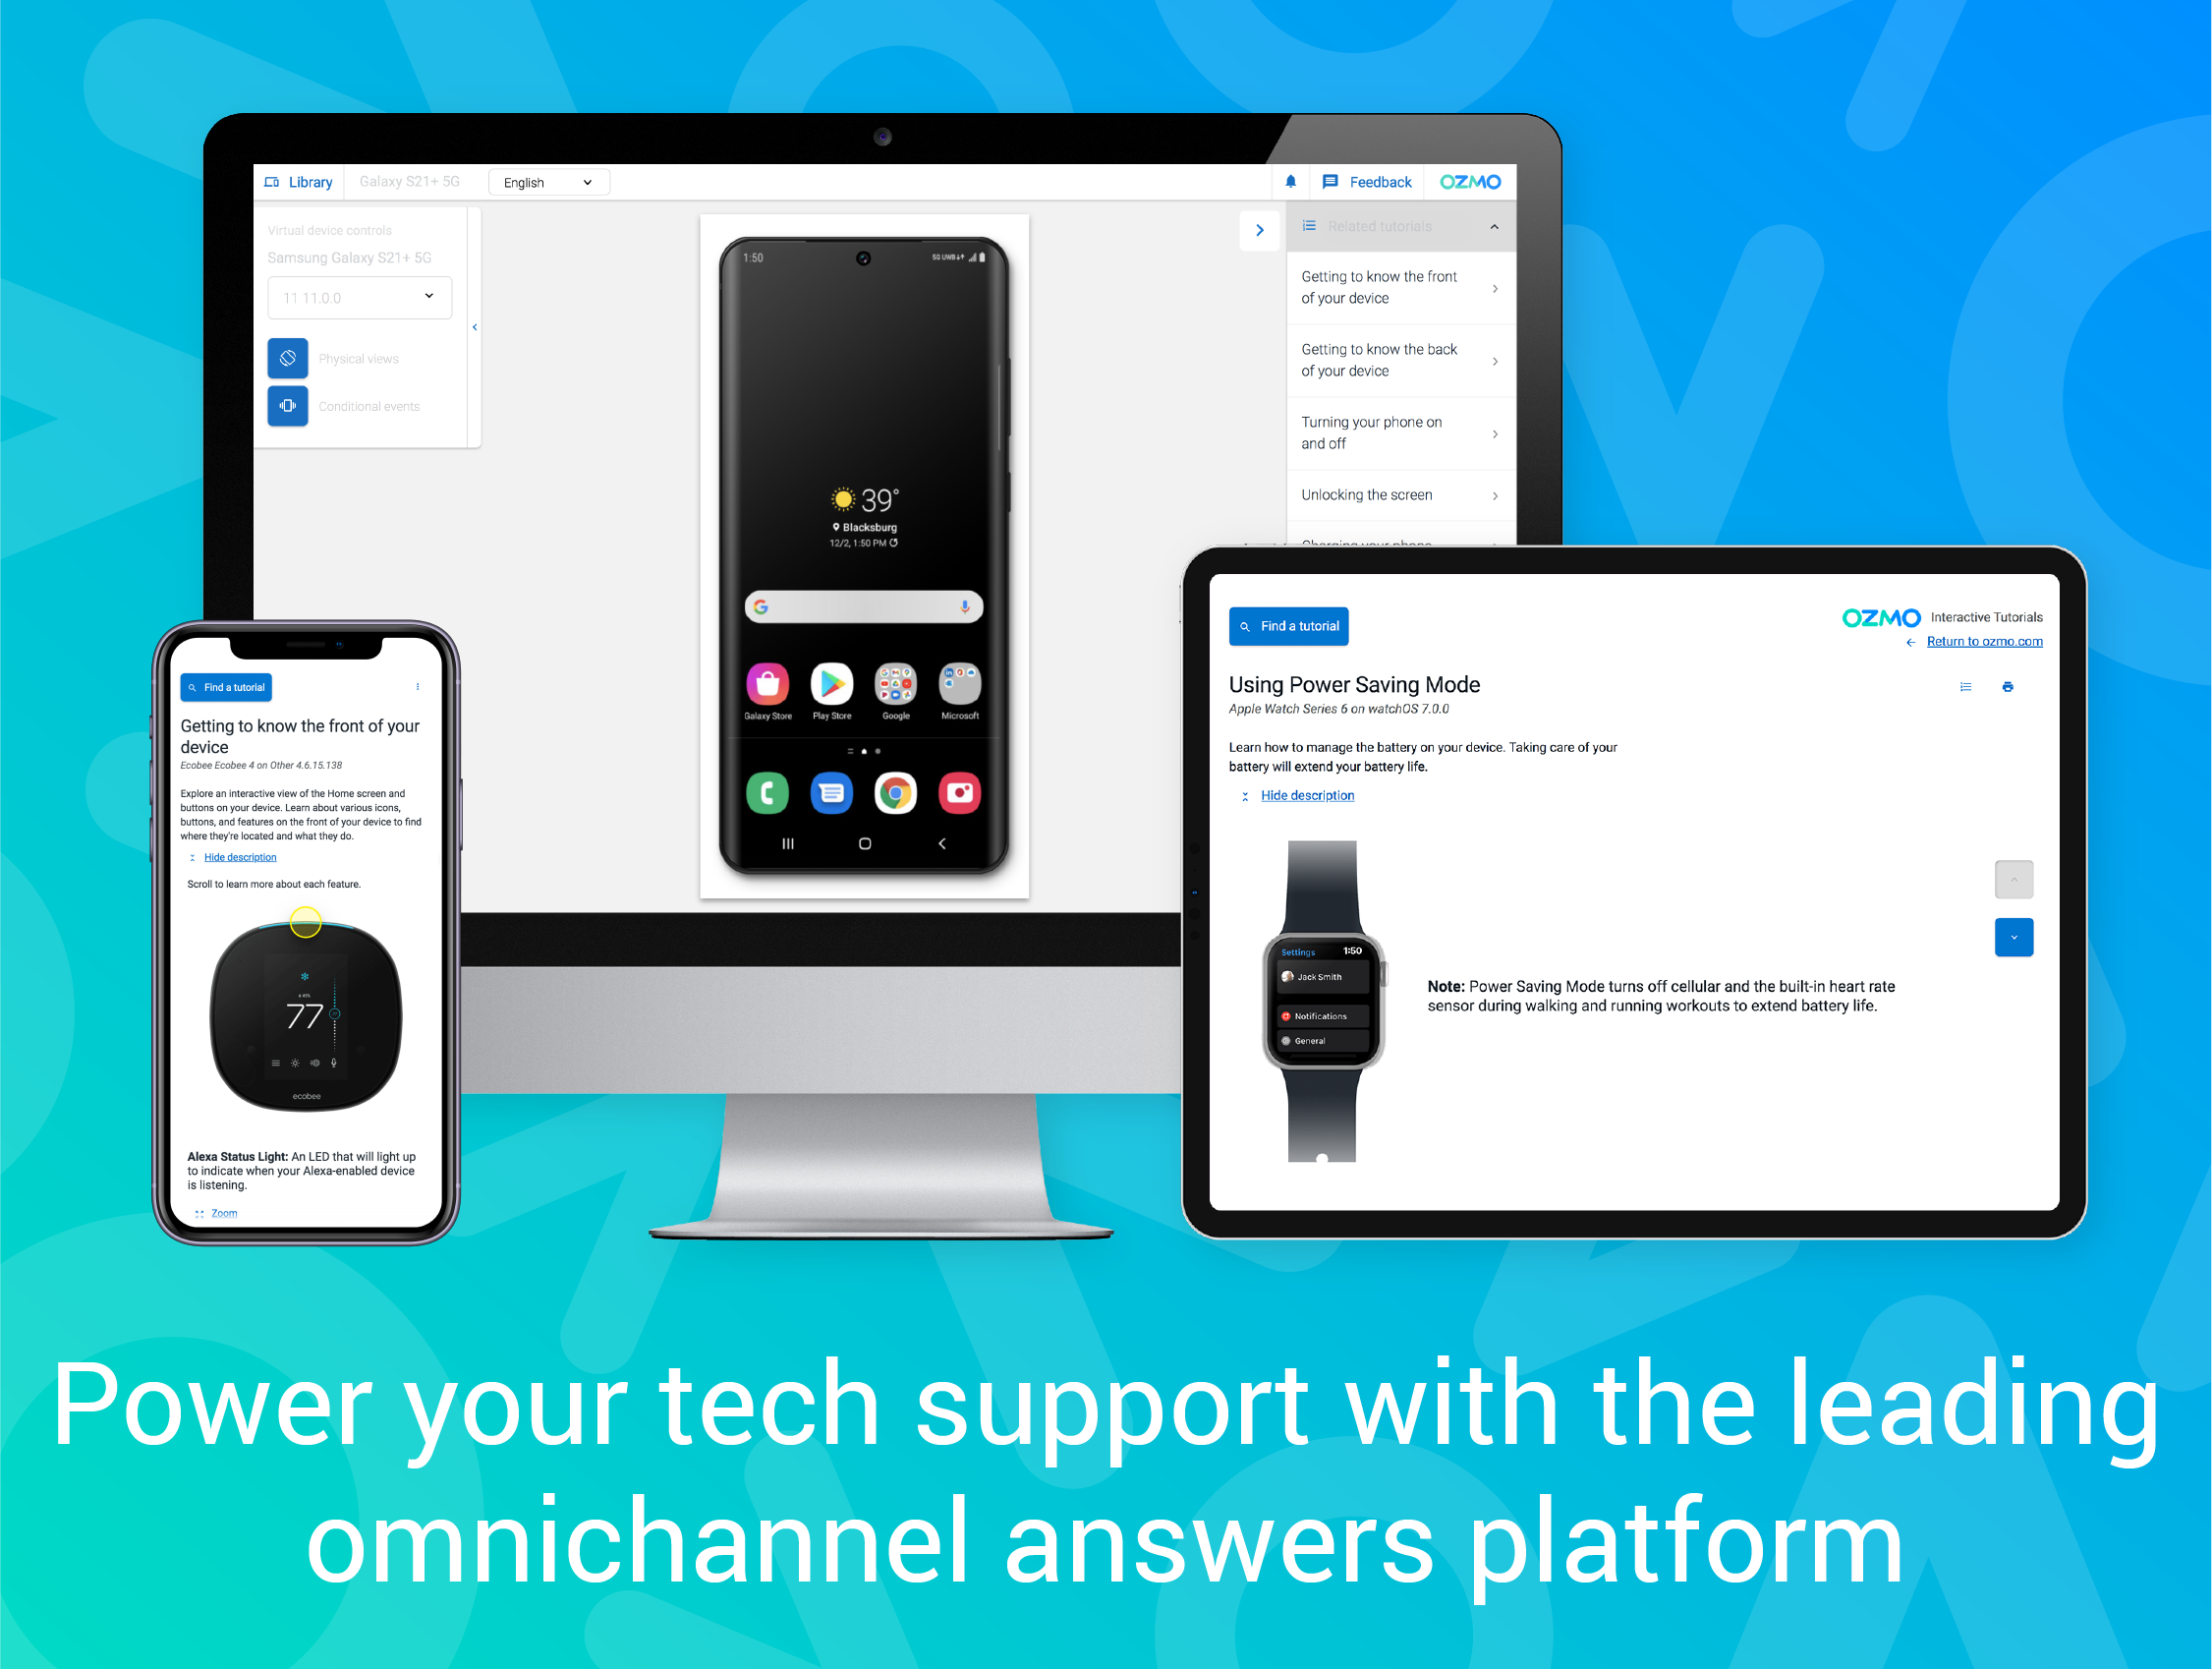 Power your tech support with the leading omnichannel answers platform.